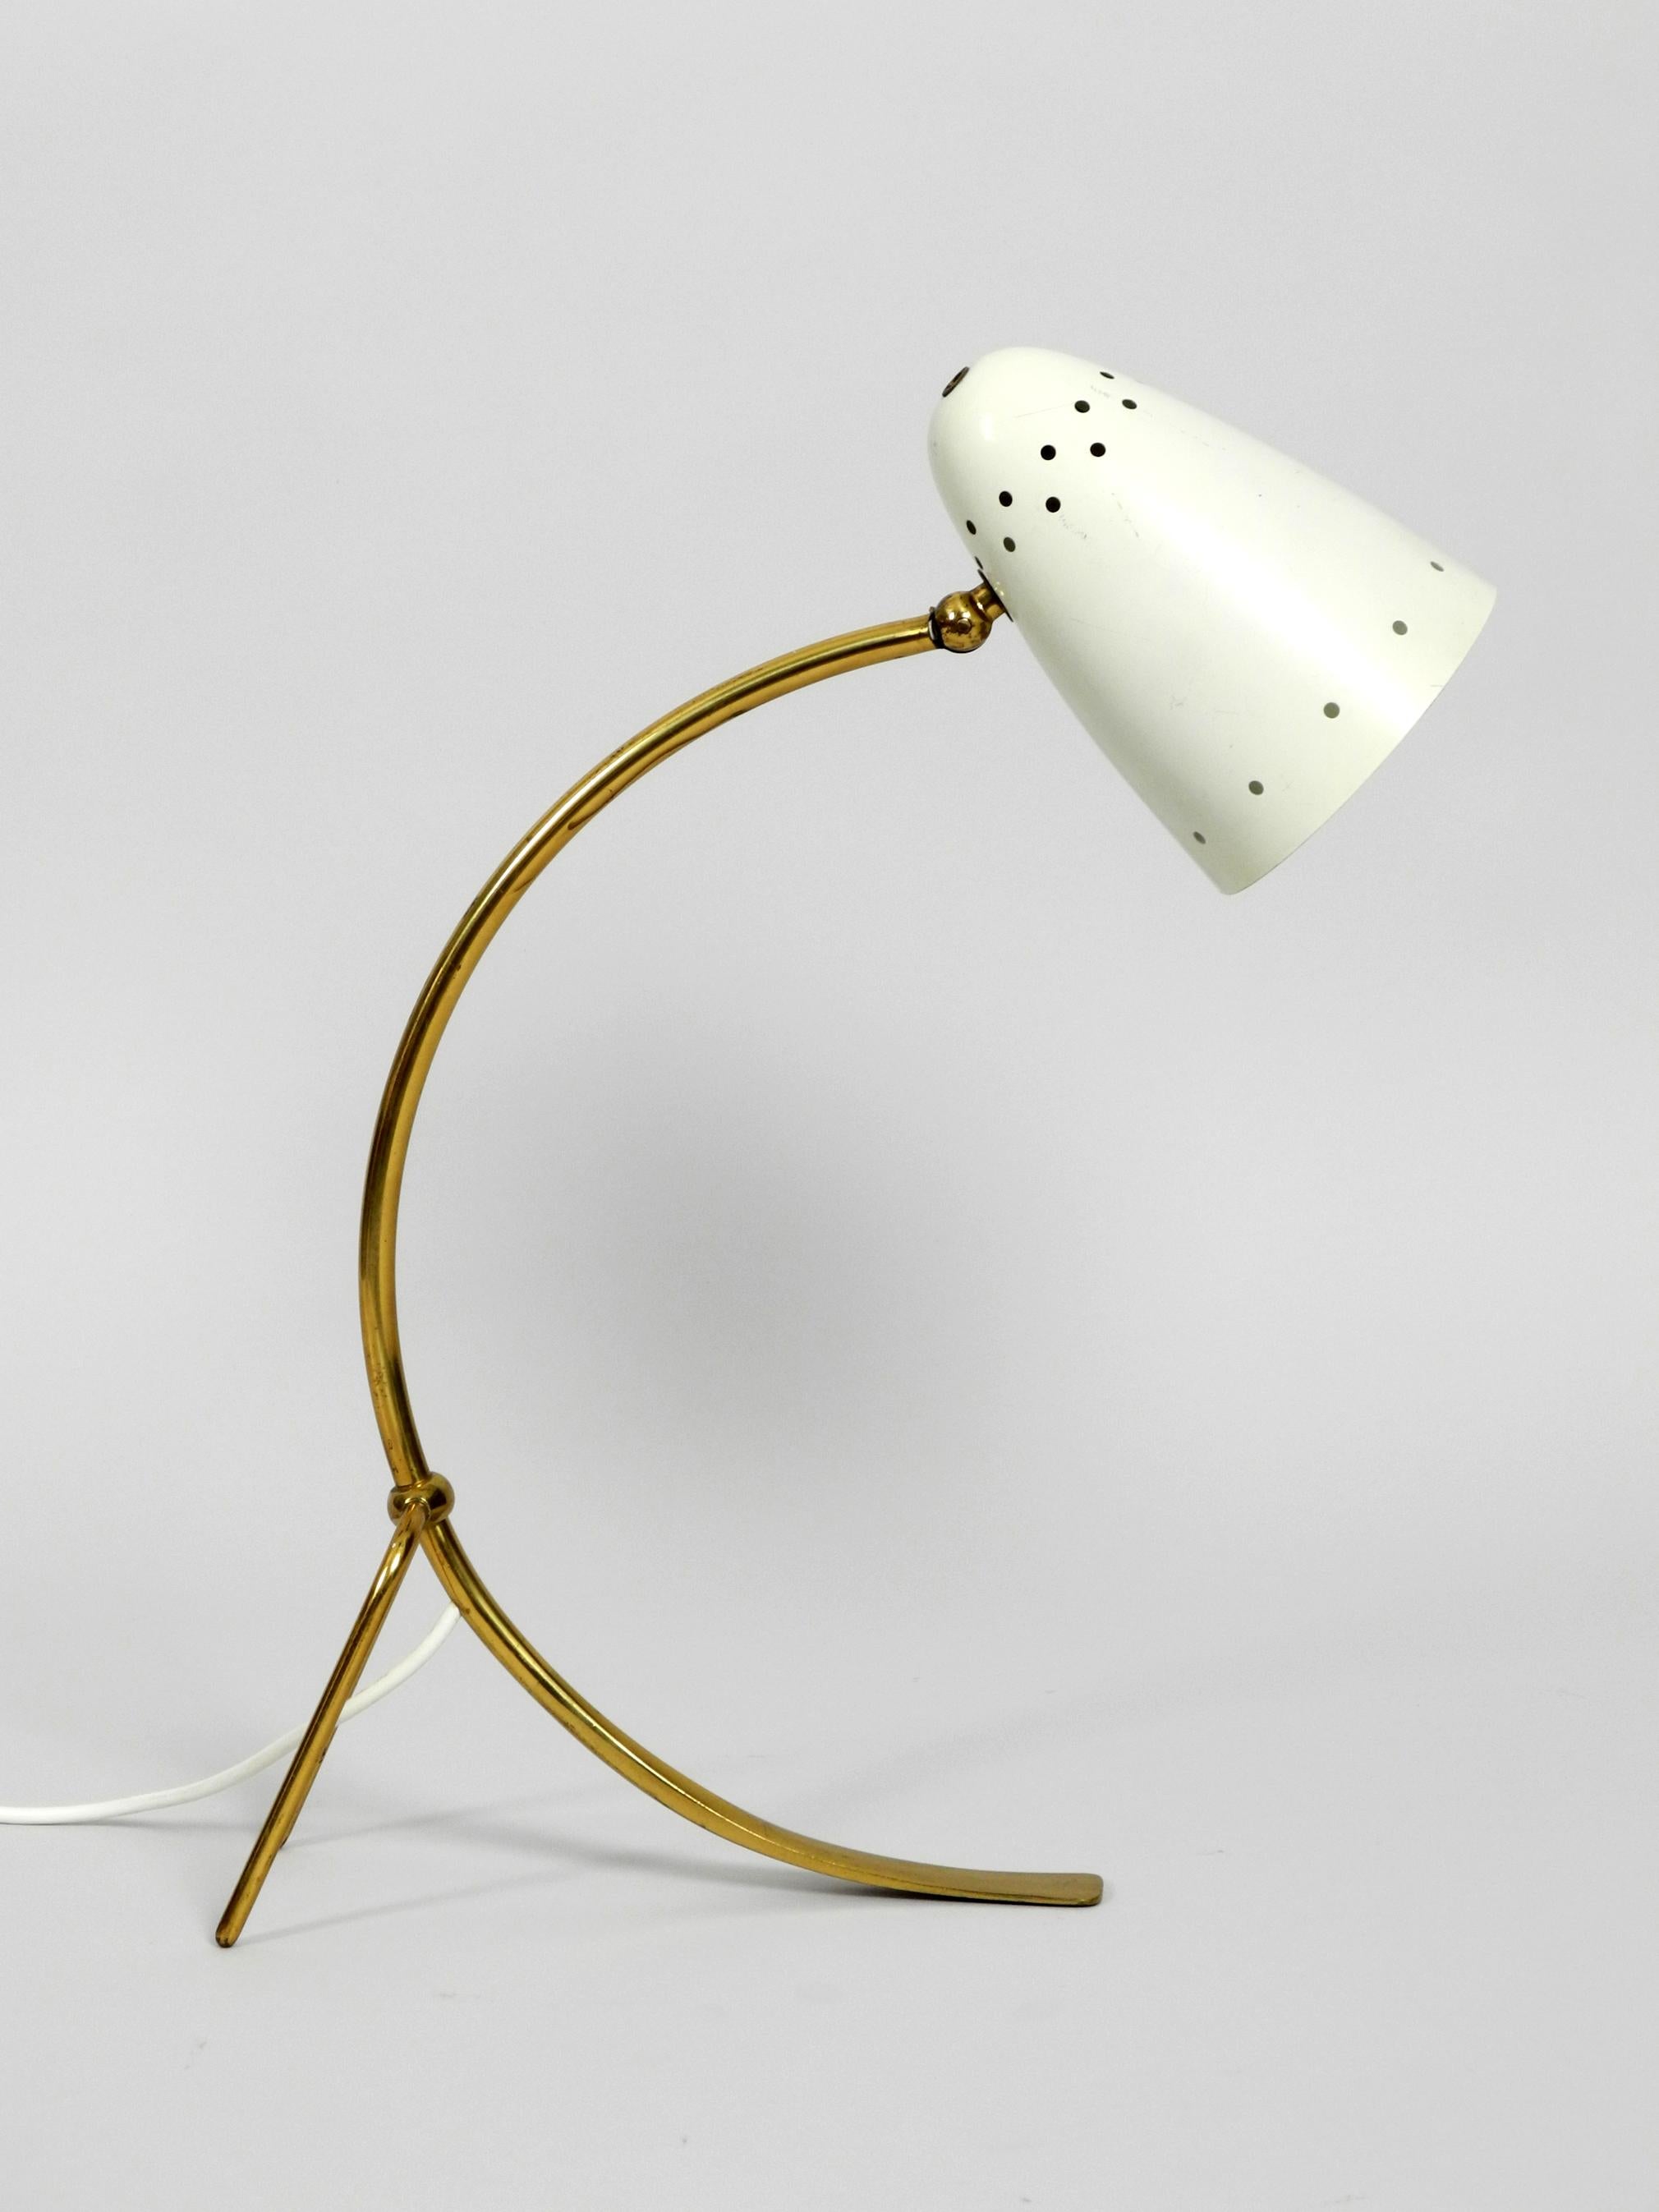 Large Midcentury Brass Metal Table Lamp by J. T. Kalmar Wien Made in Austria In Good Condition For Sale In München, DE